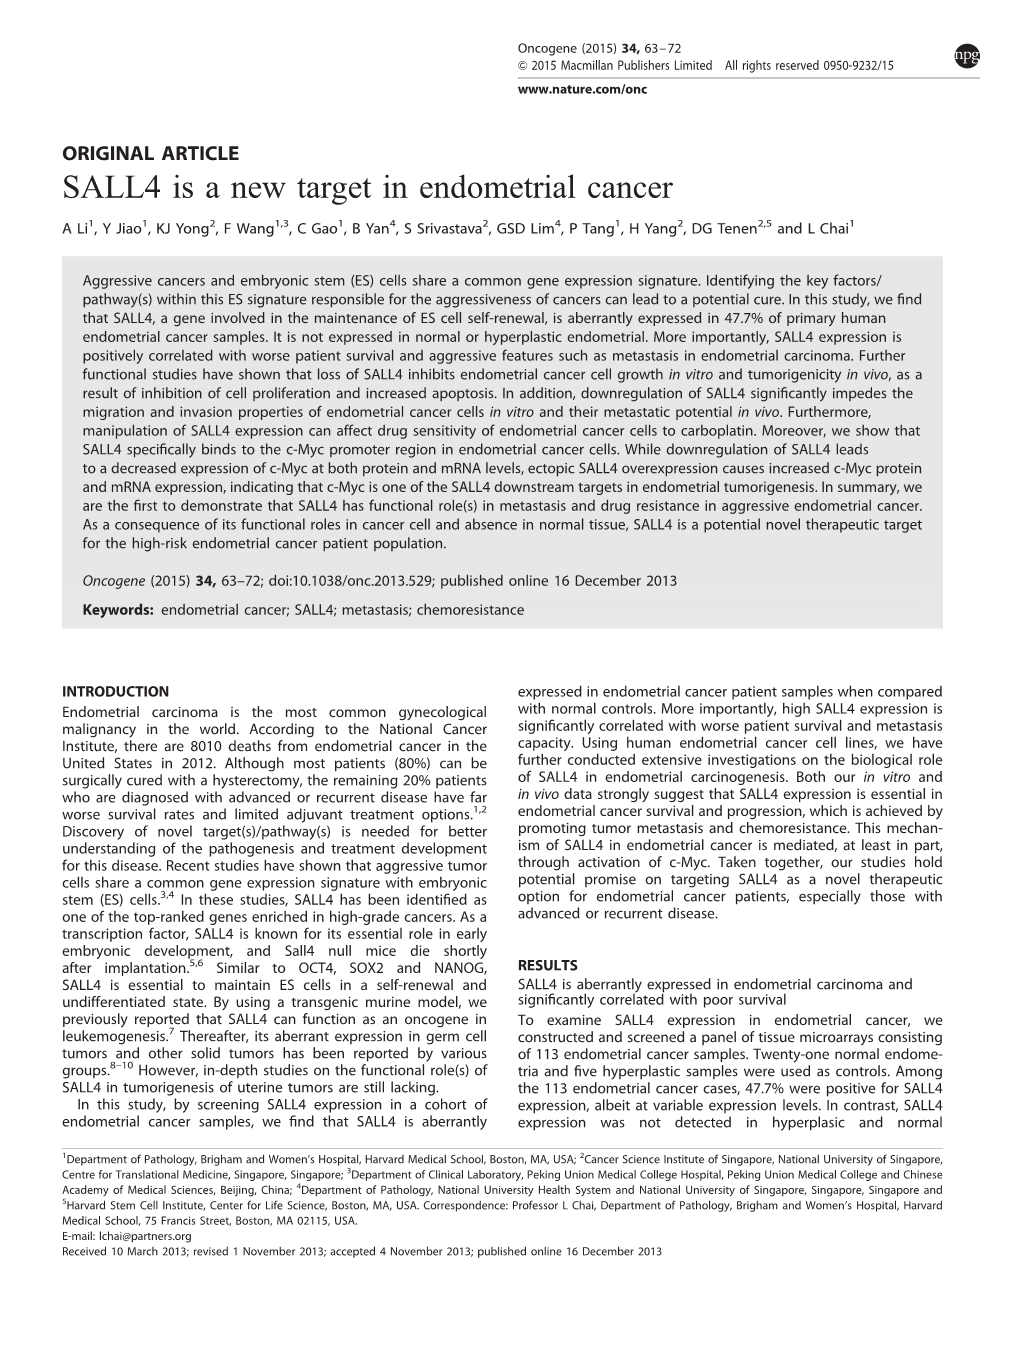 SALL4 Is a New Target in Endometrial Cancer